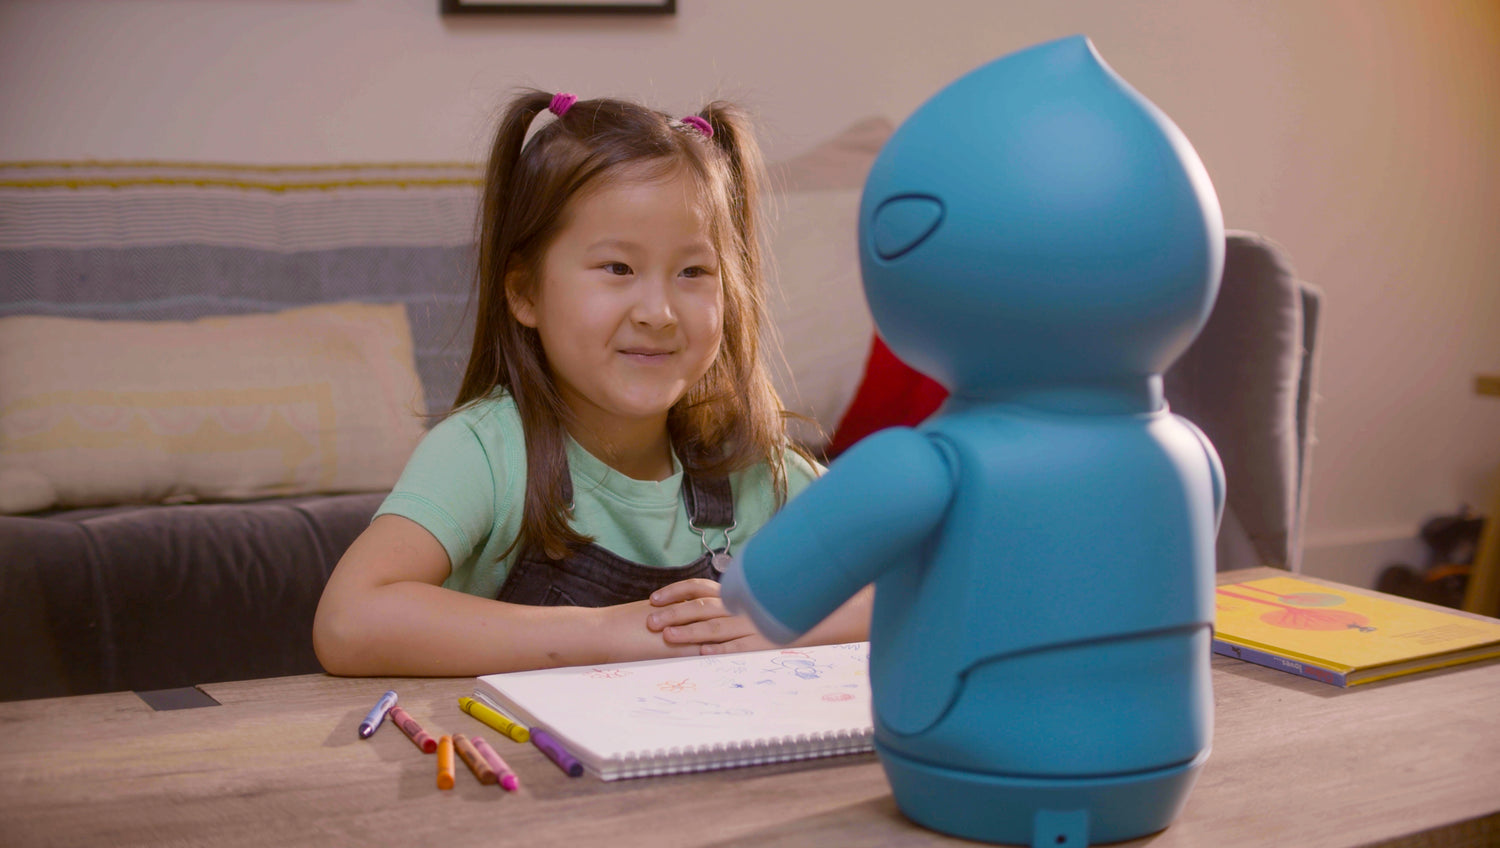 Kids Learning with Robots: The New Child-Robot Interaction